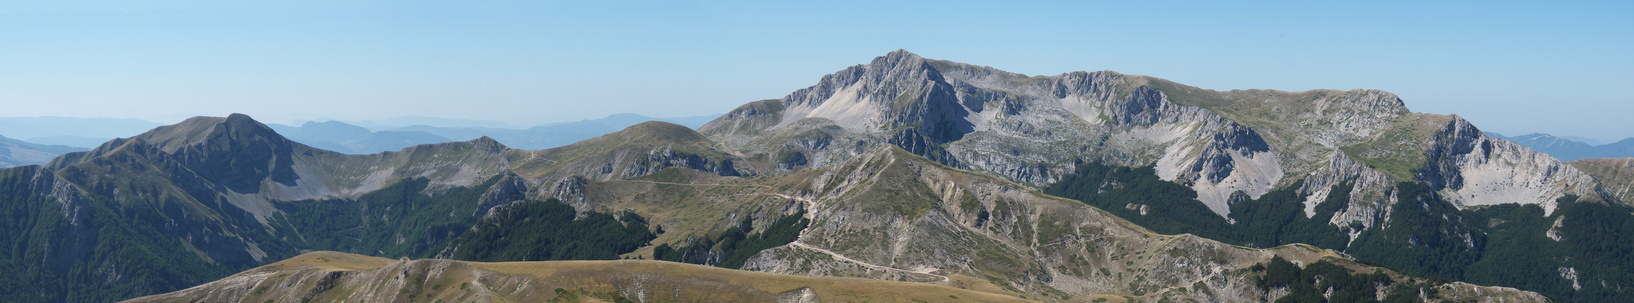 [20120809_100102_MtDiCambioVTTPano_.jpg]
Terminillo and part of the trail leading towards Mt di Cambio.